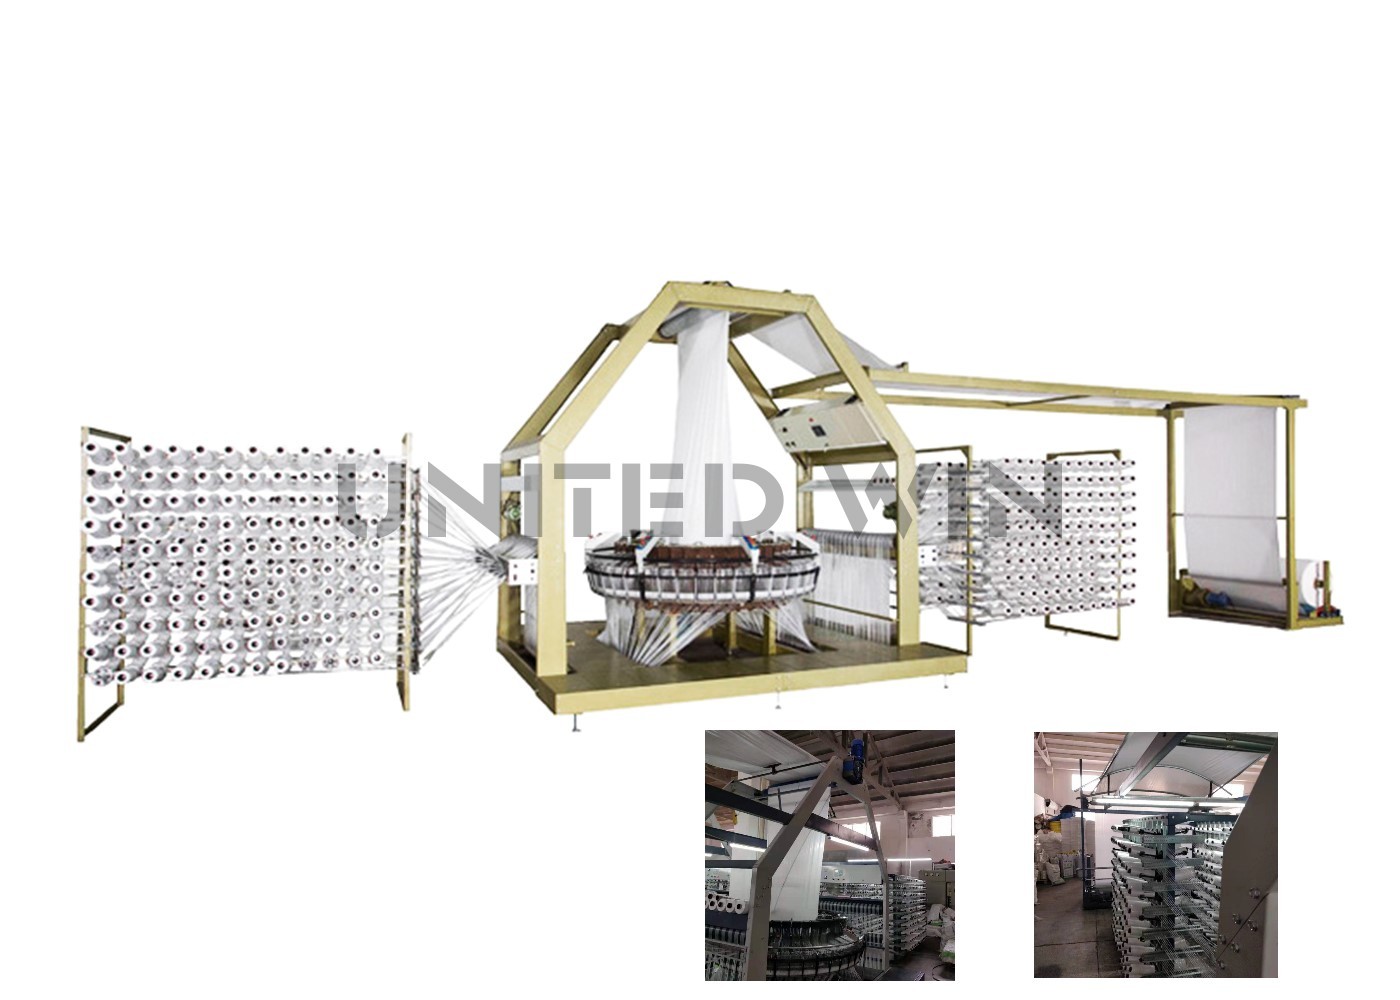 Six Shuttle Circular Loom Machine PP Woven Bag Production Line Plant Full automatic 7.5kw